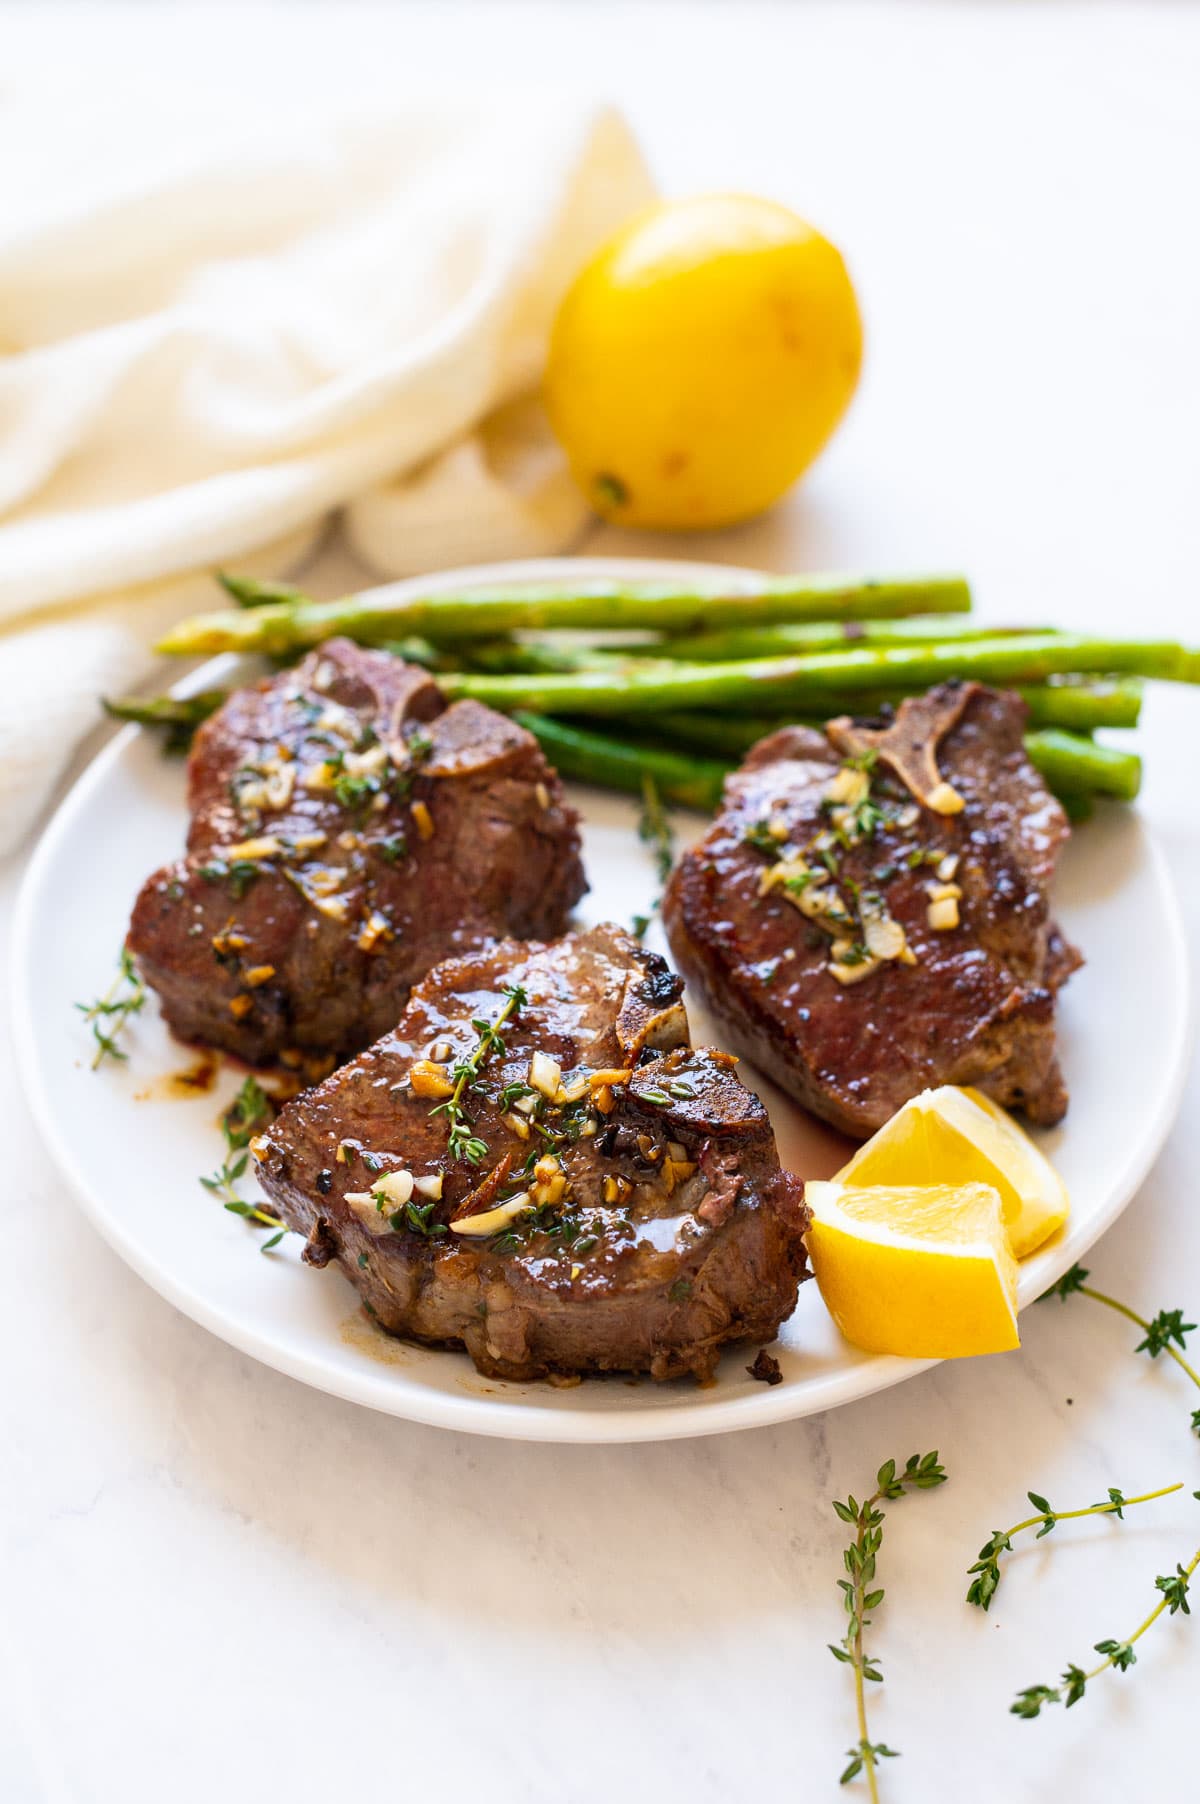 Three lamb loin chops garnished with garlic and fresh thyme served on a plate with asparagus and lemon slices.